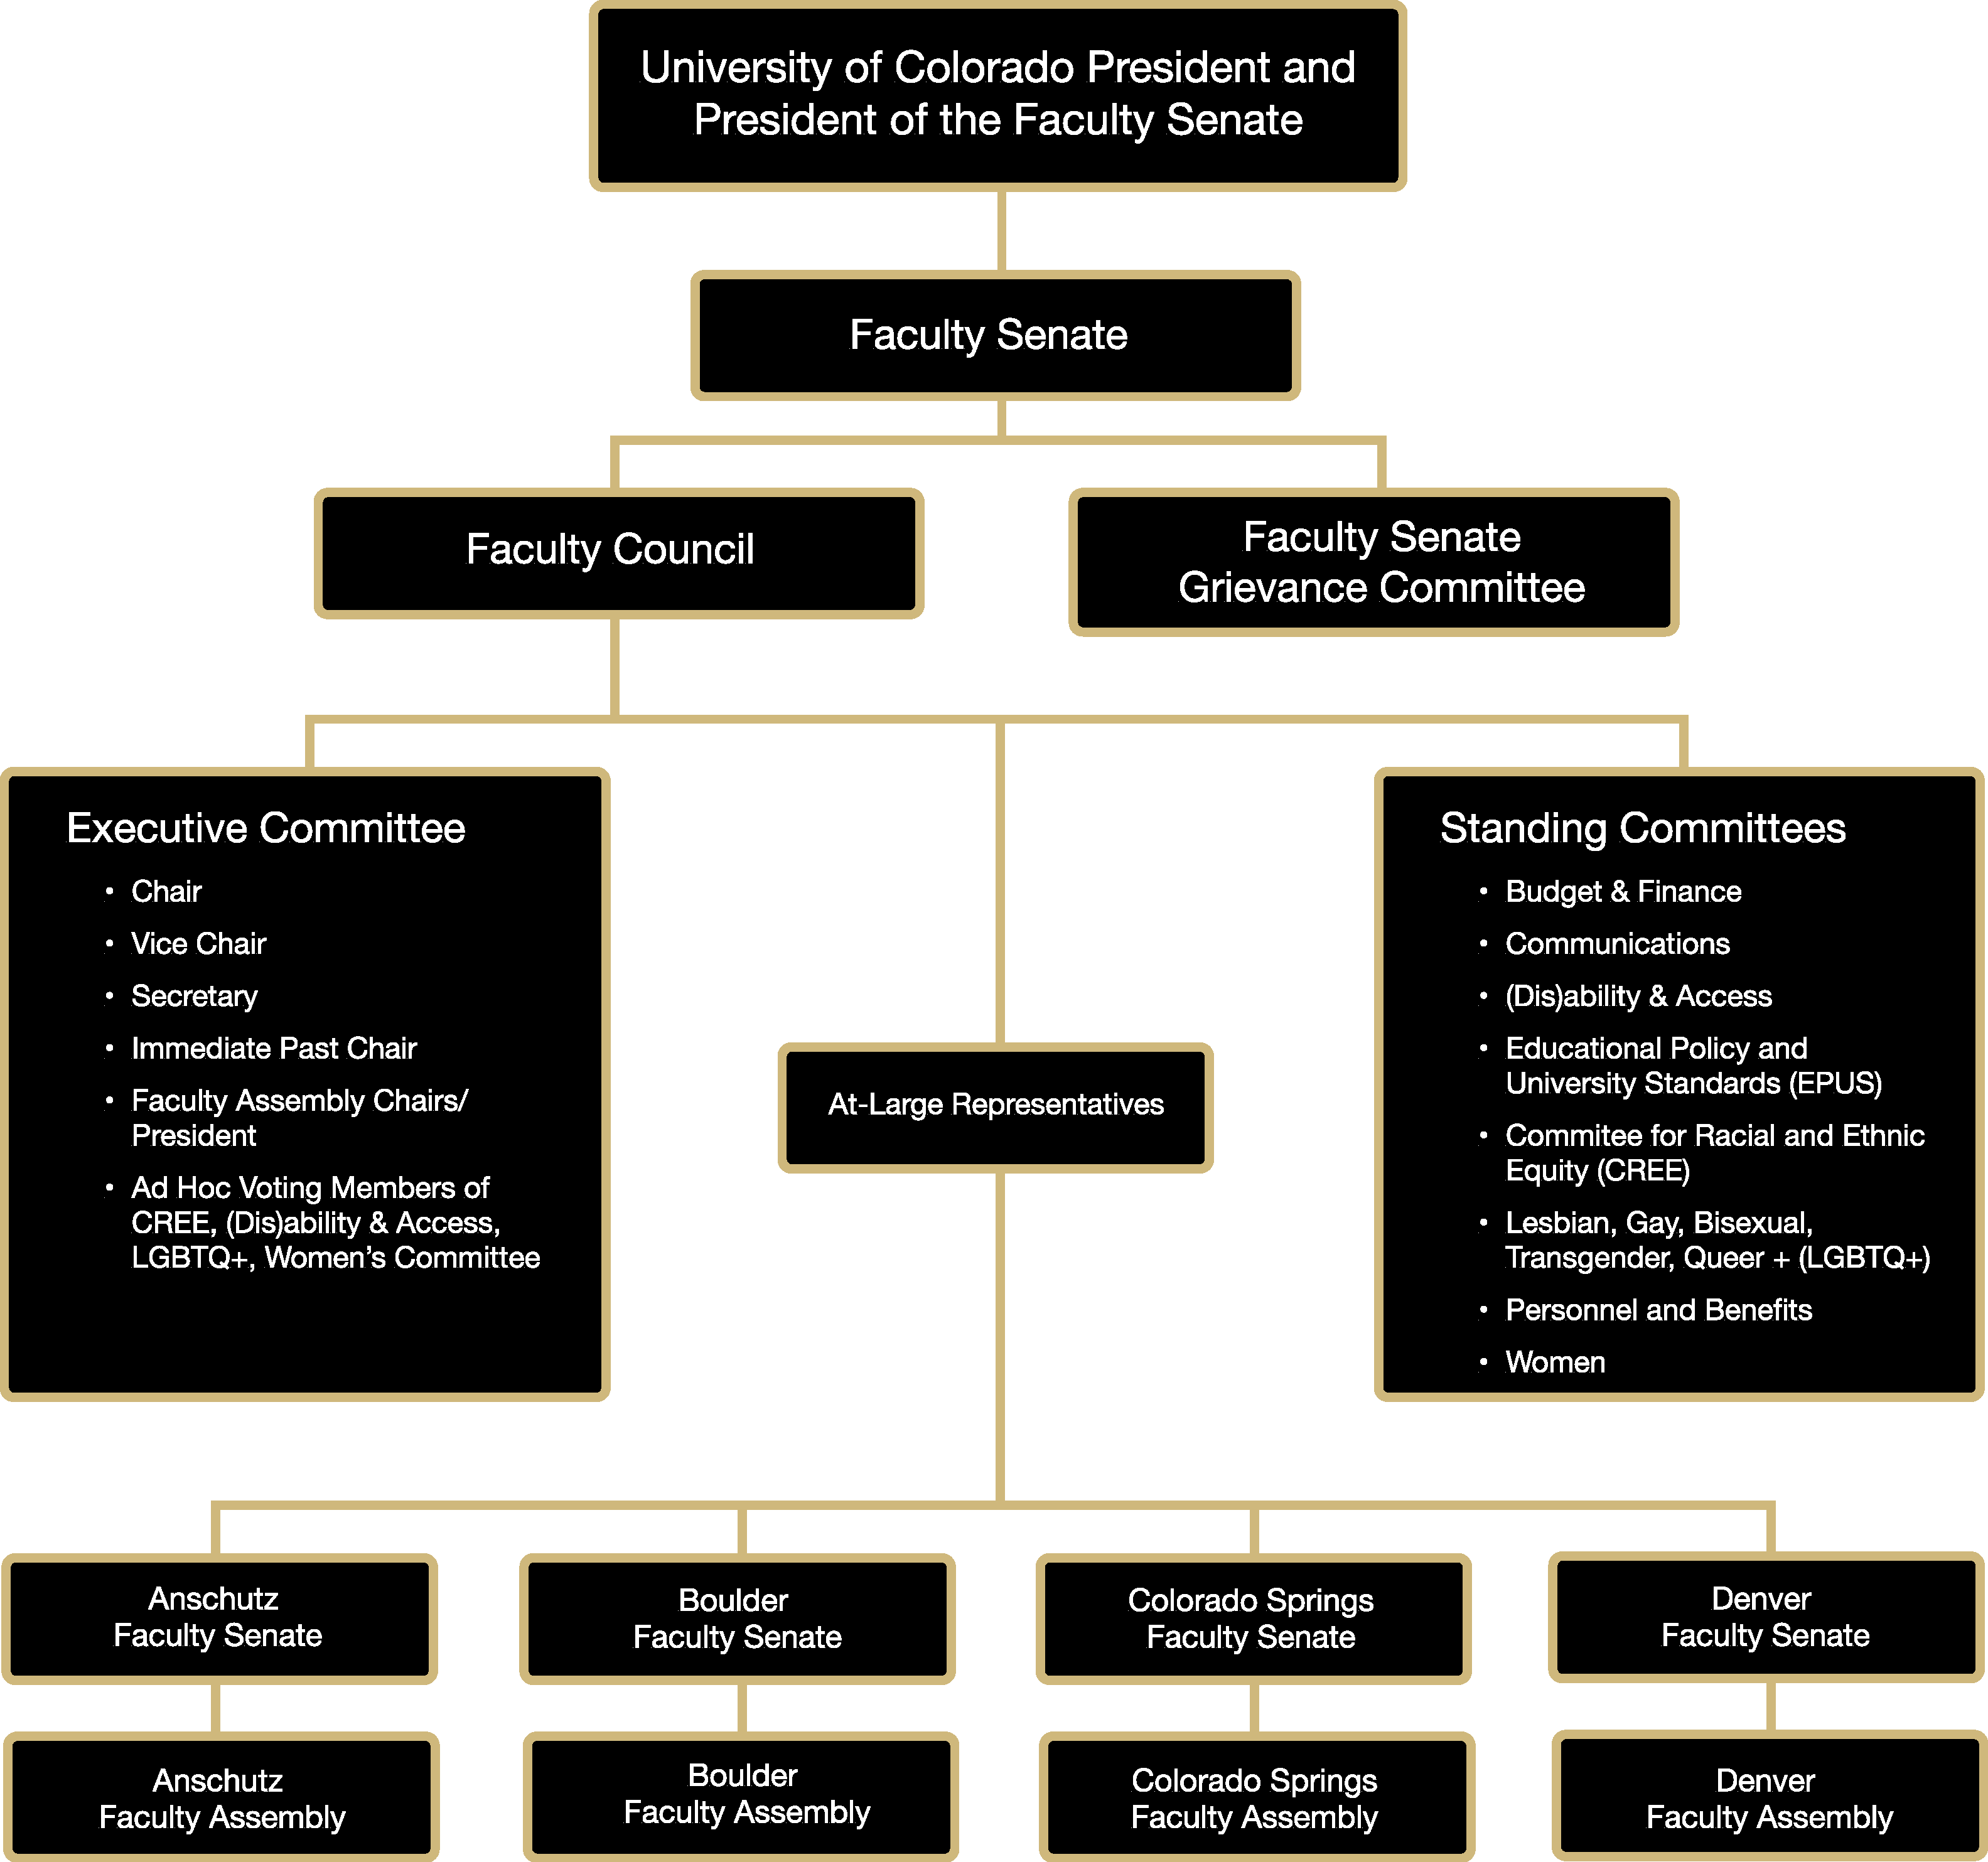 organizational chart displaying the structure with faculty senate, faculty council and faculty assembly